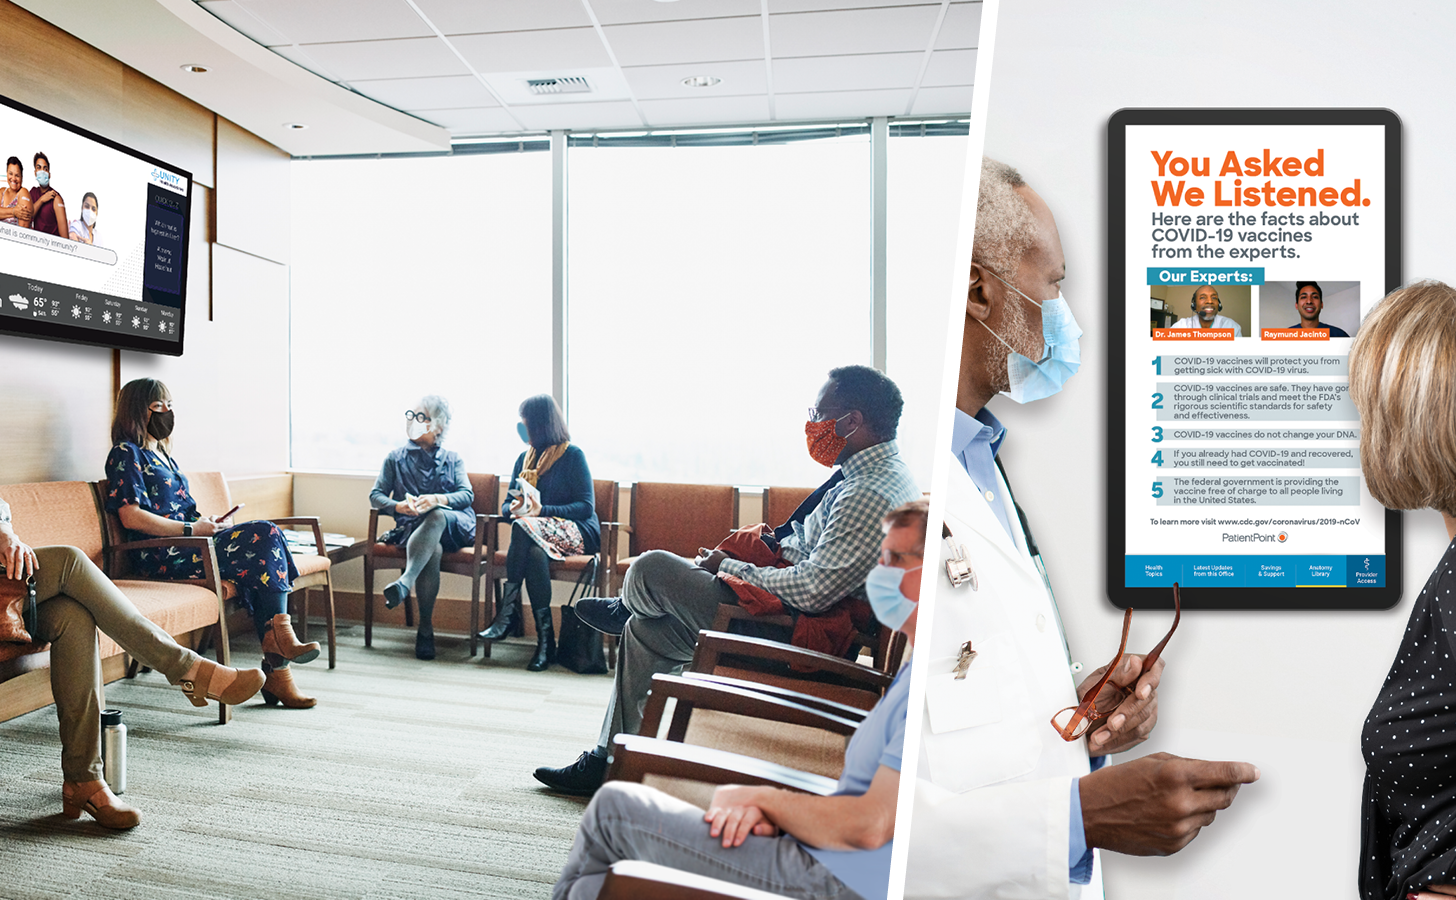 A group of patients in a waiting room views content on a digital screen and a doctor and a patient look at a touchscreen device in an exam room